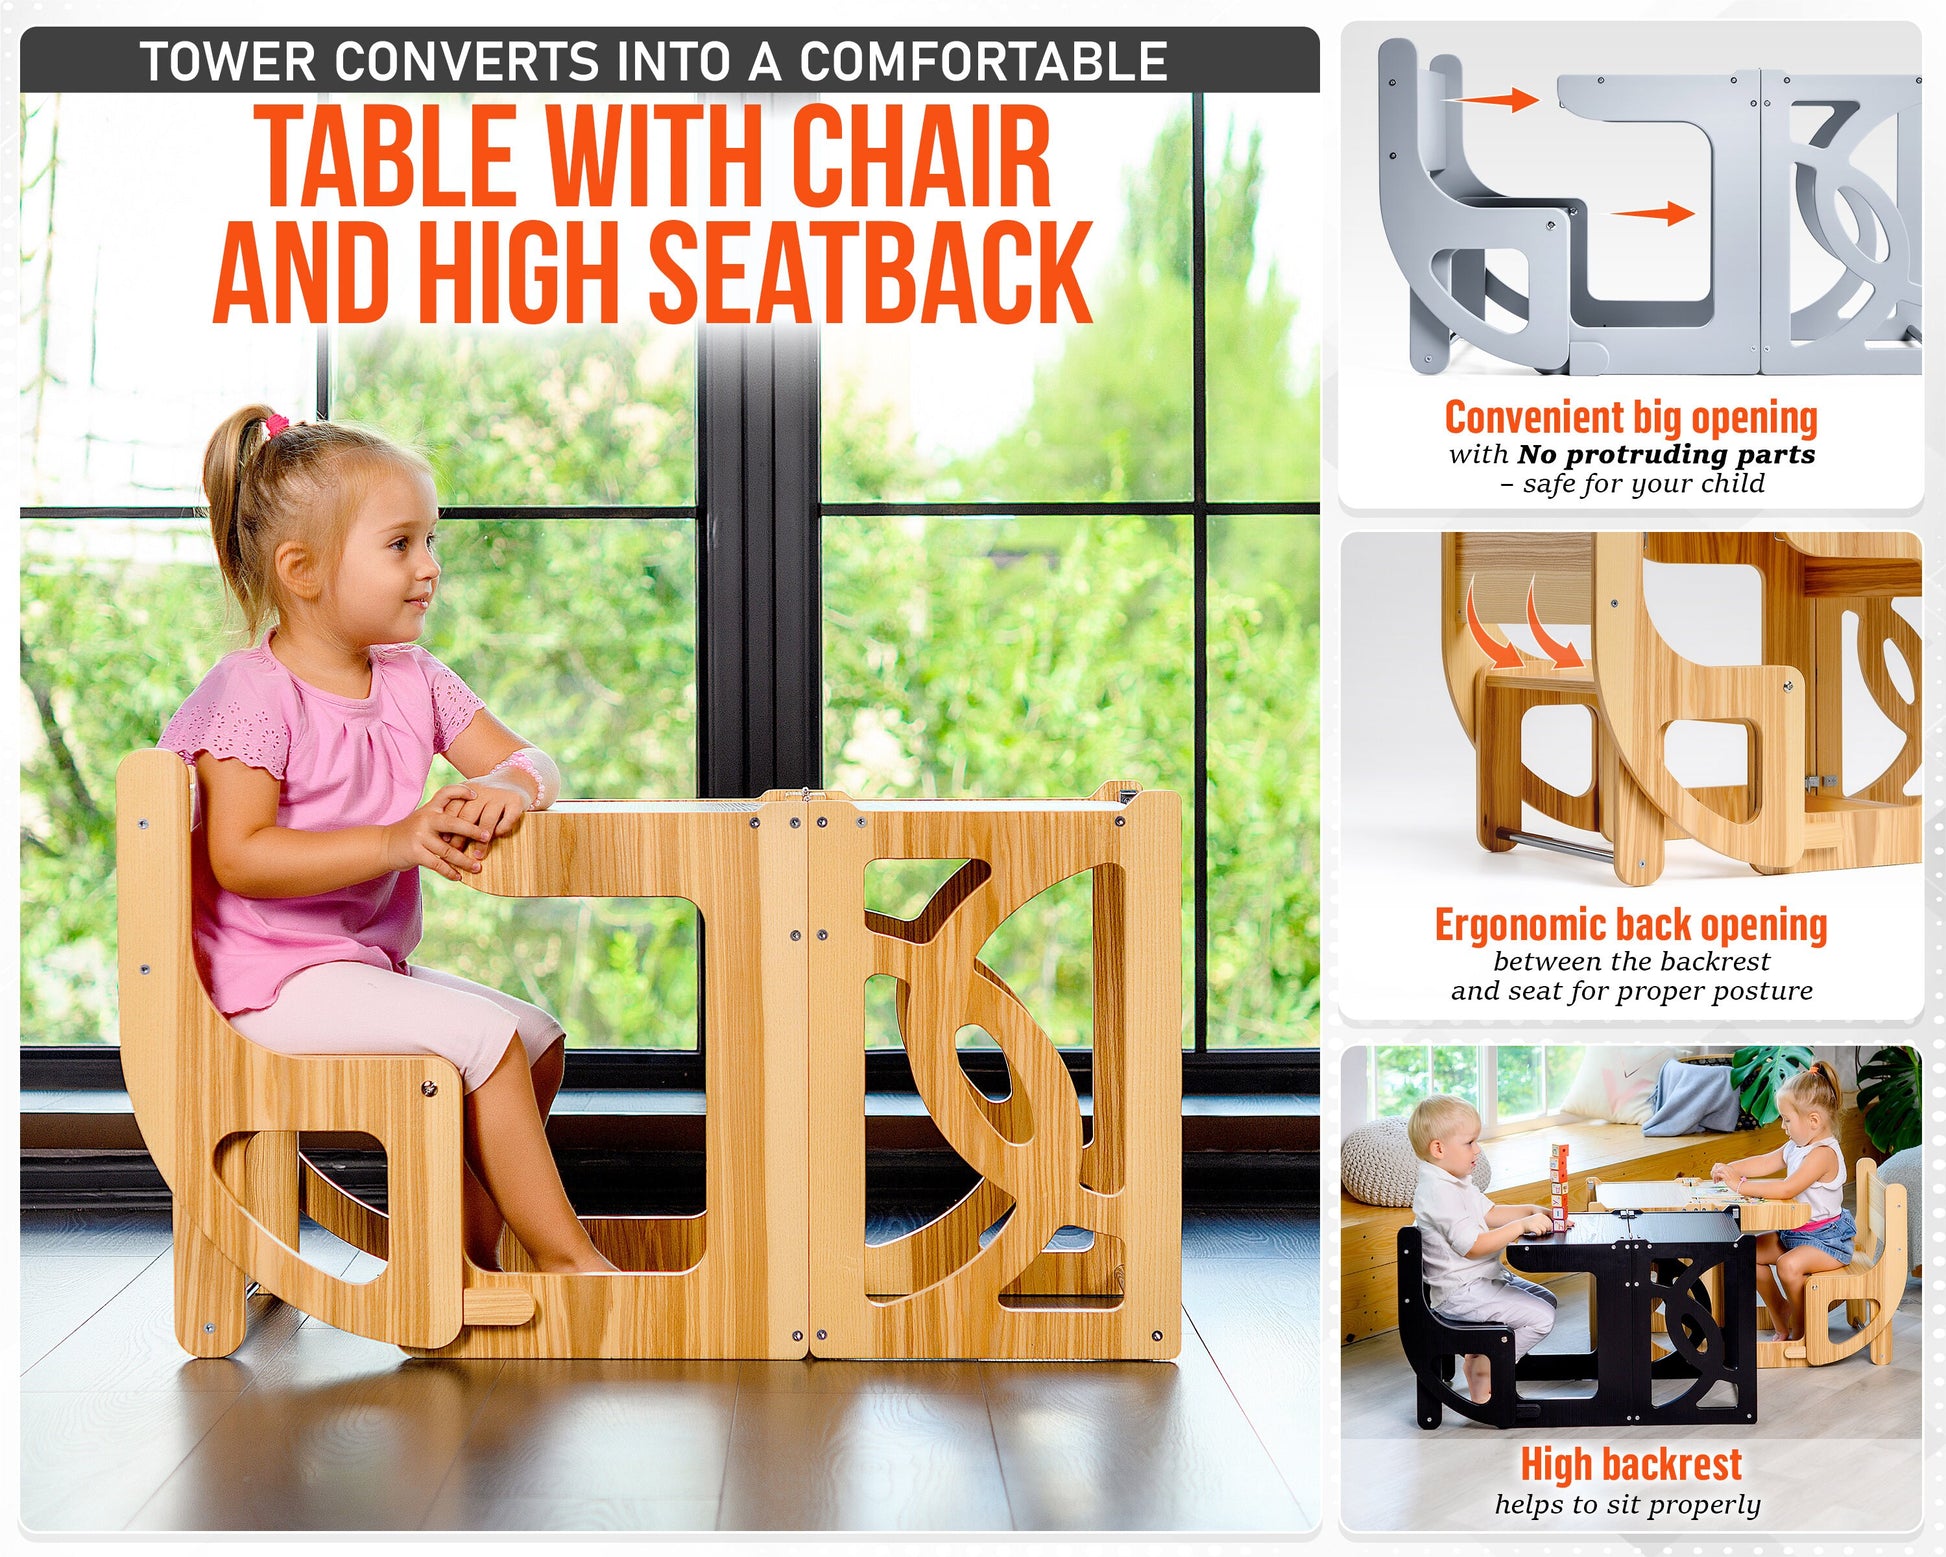 Convertible learning toddler tower table 2 in 1, kitchen helper stool